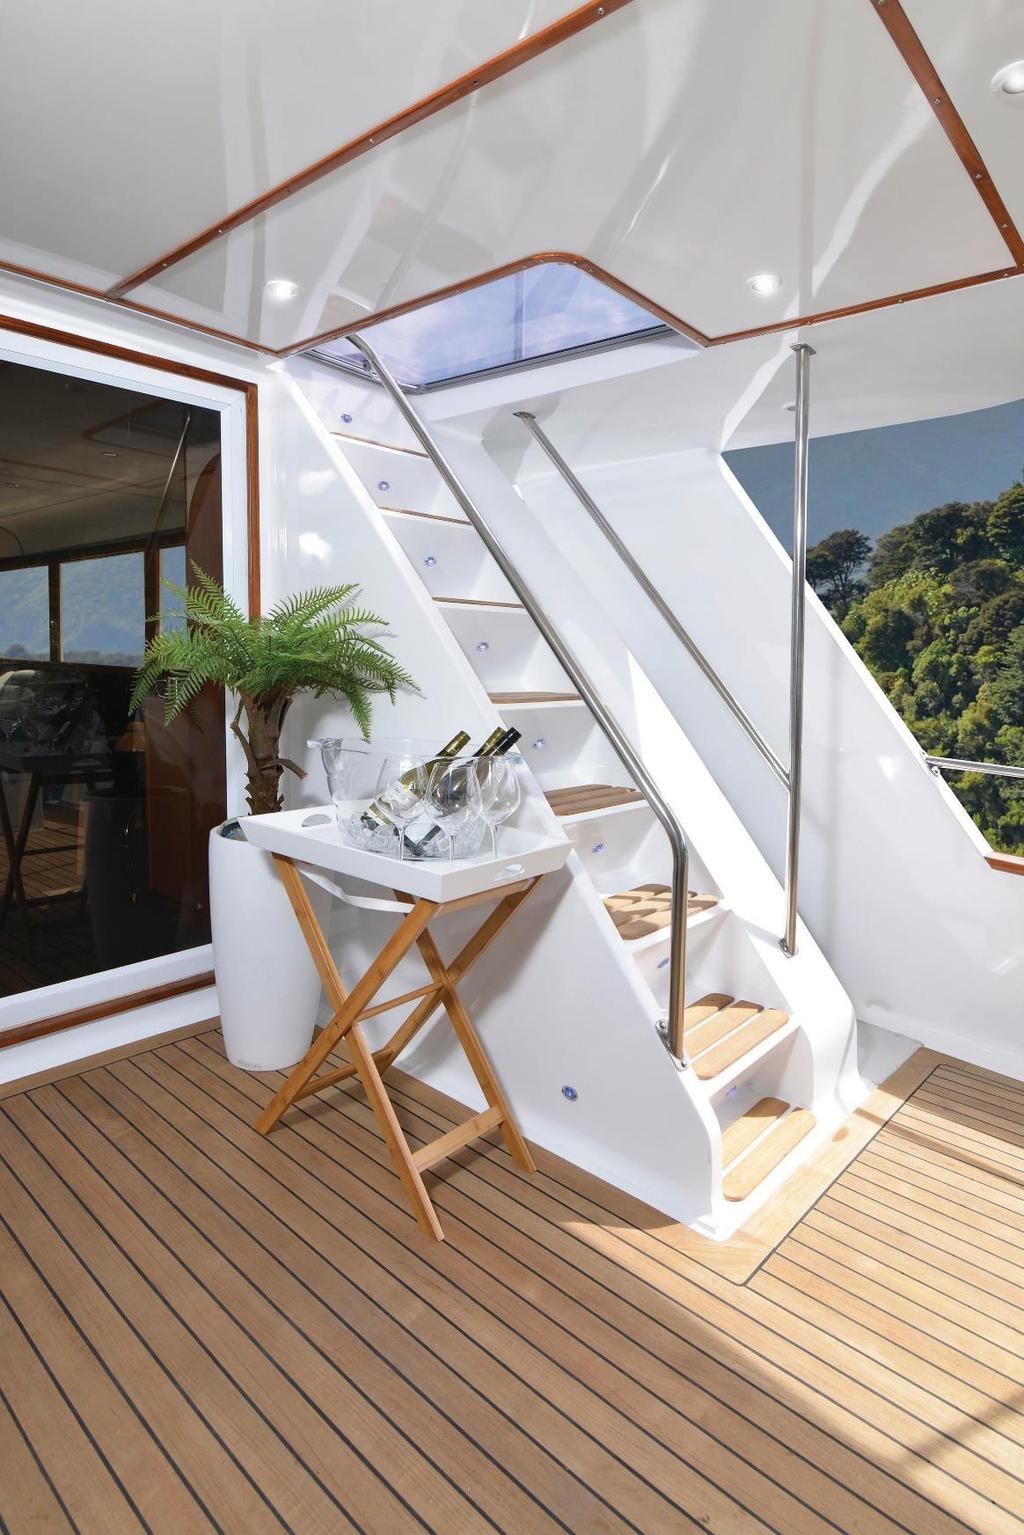 ABEL TASMAN CRUISE PACKAGES RETAIL RATES SCHEDULE - GST INCL @ 15% NUMBER OF GUESTS CRUISE DURATION 1 APR 2017 31 MAR 2019 RETAIL PRICING MULTI-NIGHT ABEL TASMAN CRUISE PACKAGE 1-2 guests (1 cabin)